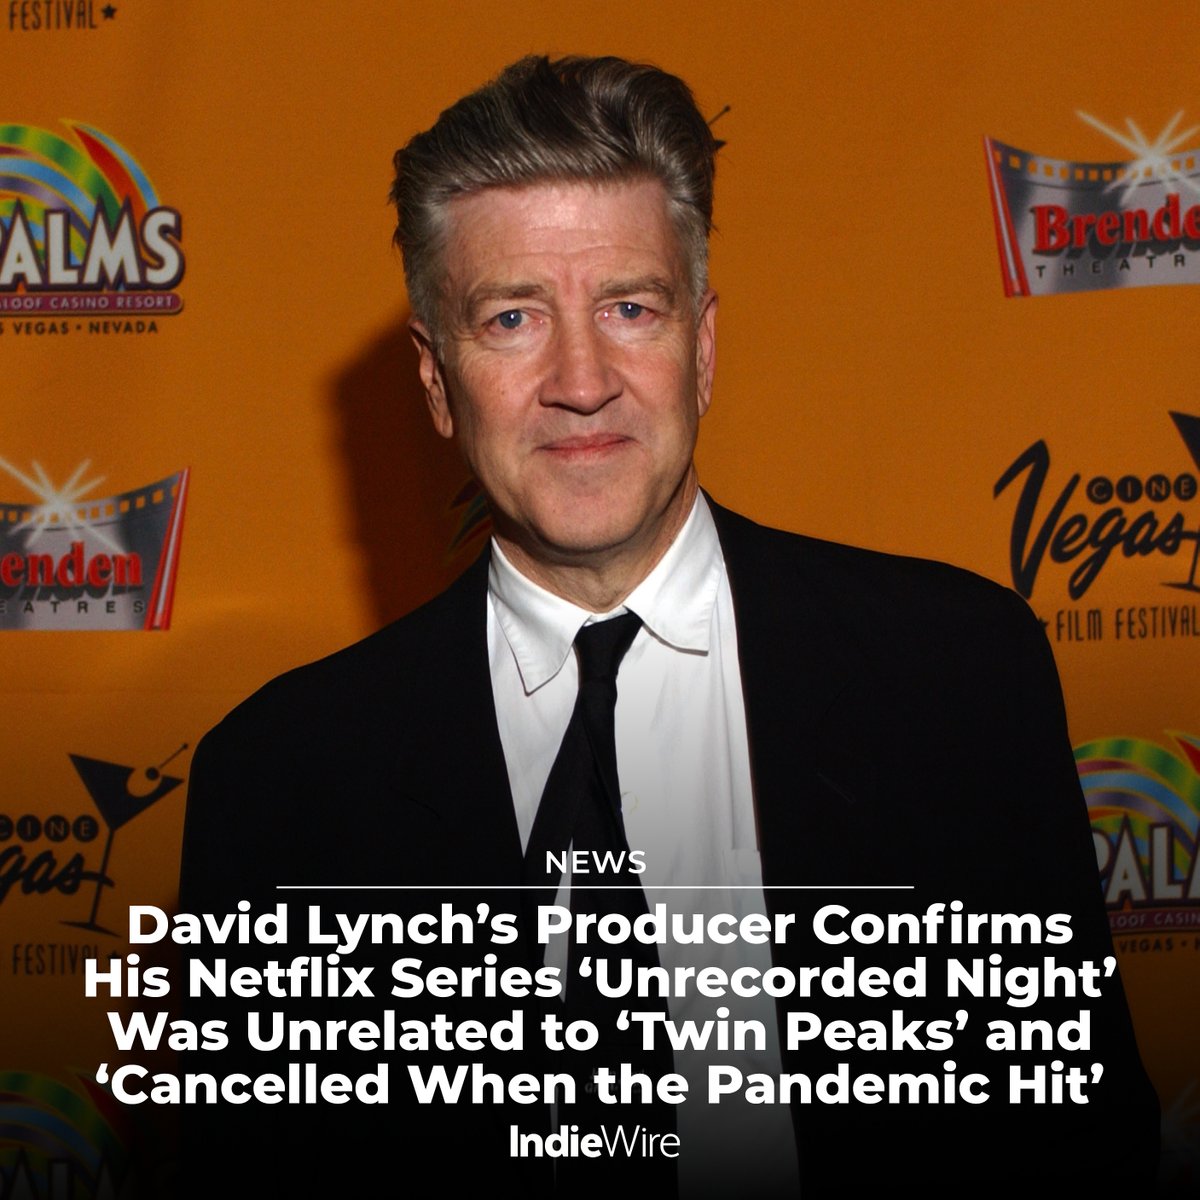 David Lynch's longtime producer Sabrina Sutherland has shed some light on “Unrecorded Night,” his planned Netflix series that was scrapped during the COVID-19 pandemic: trib.al/wUplIWj